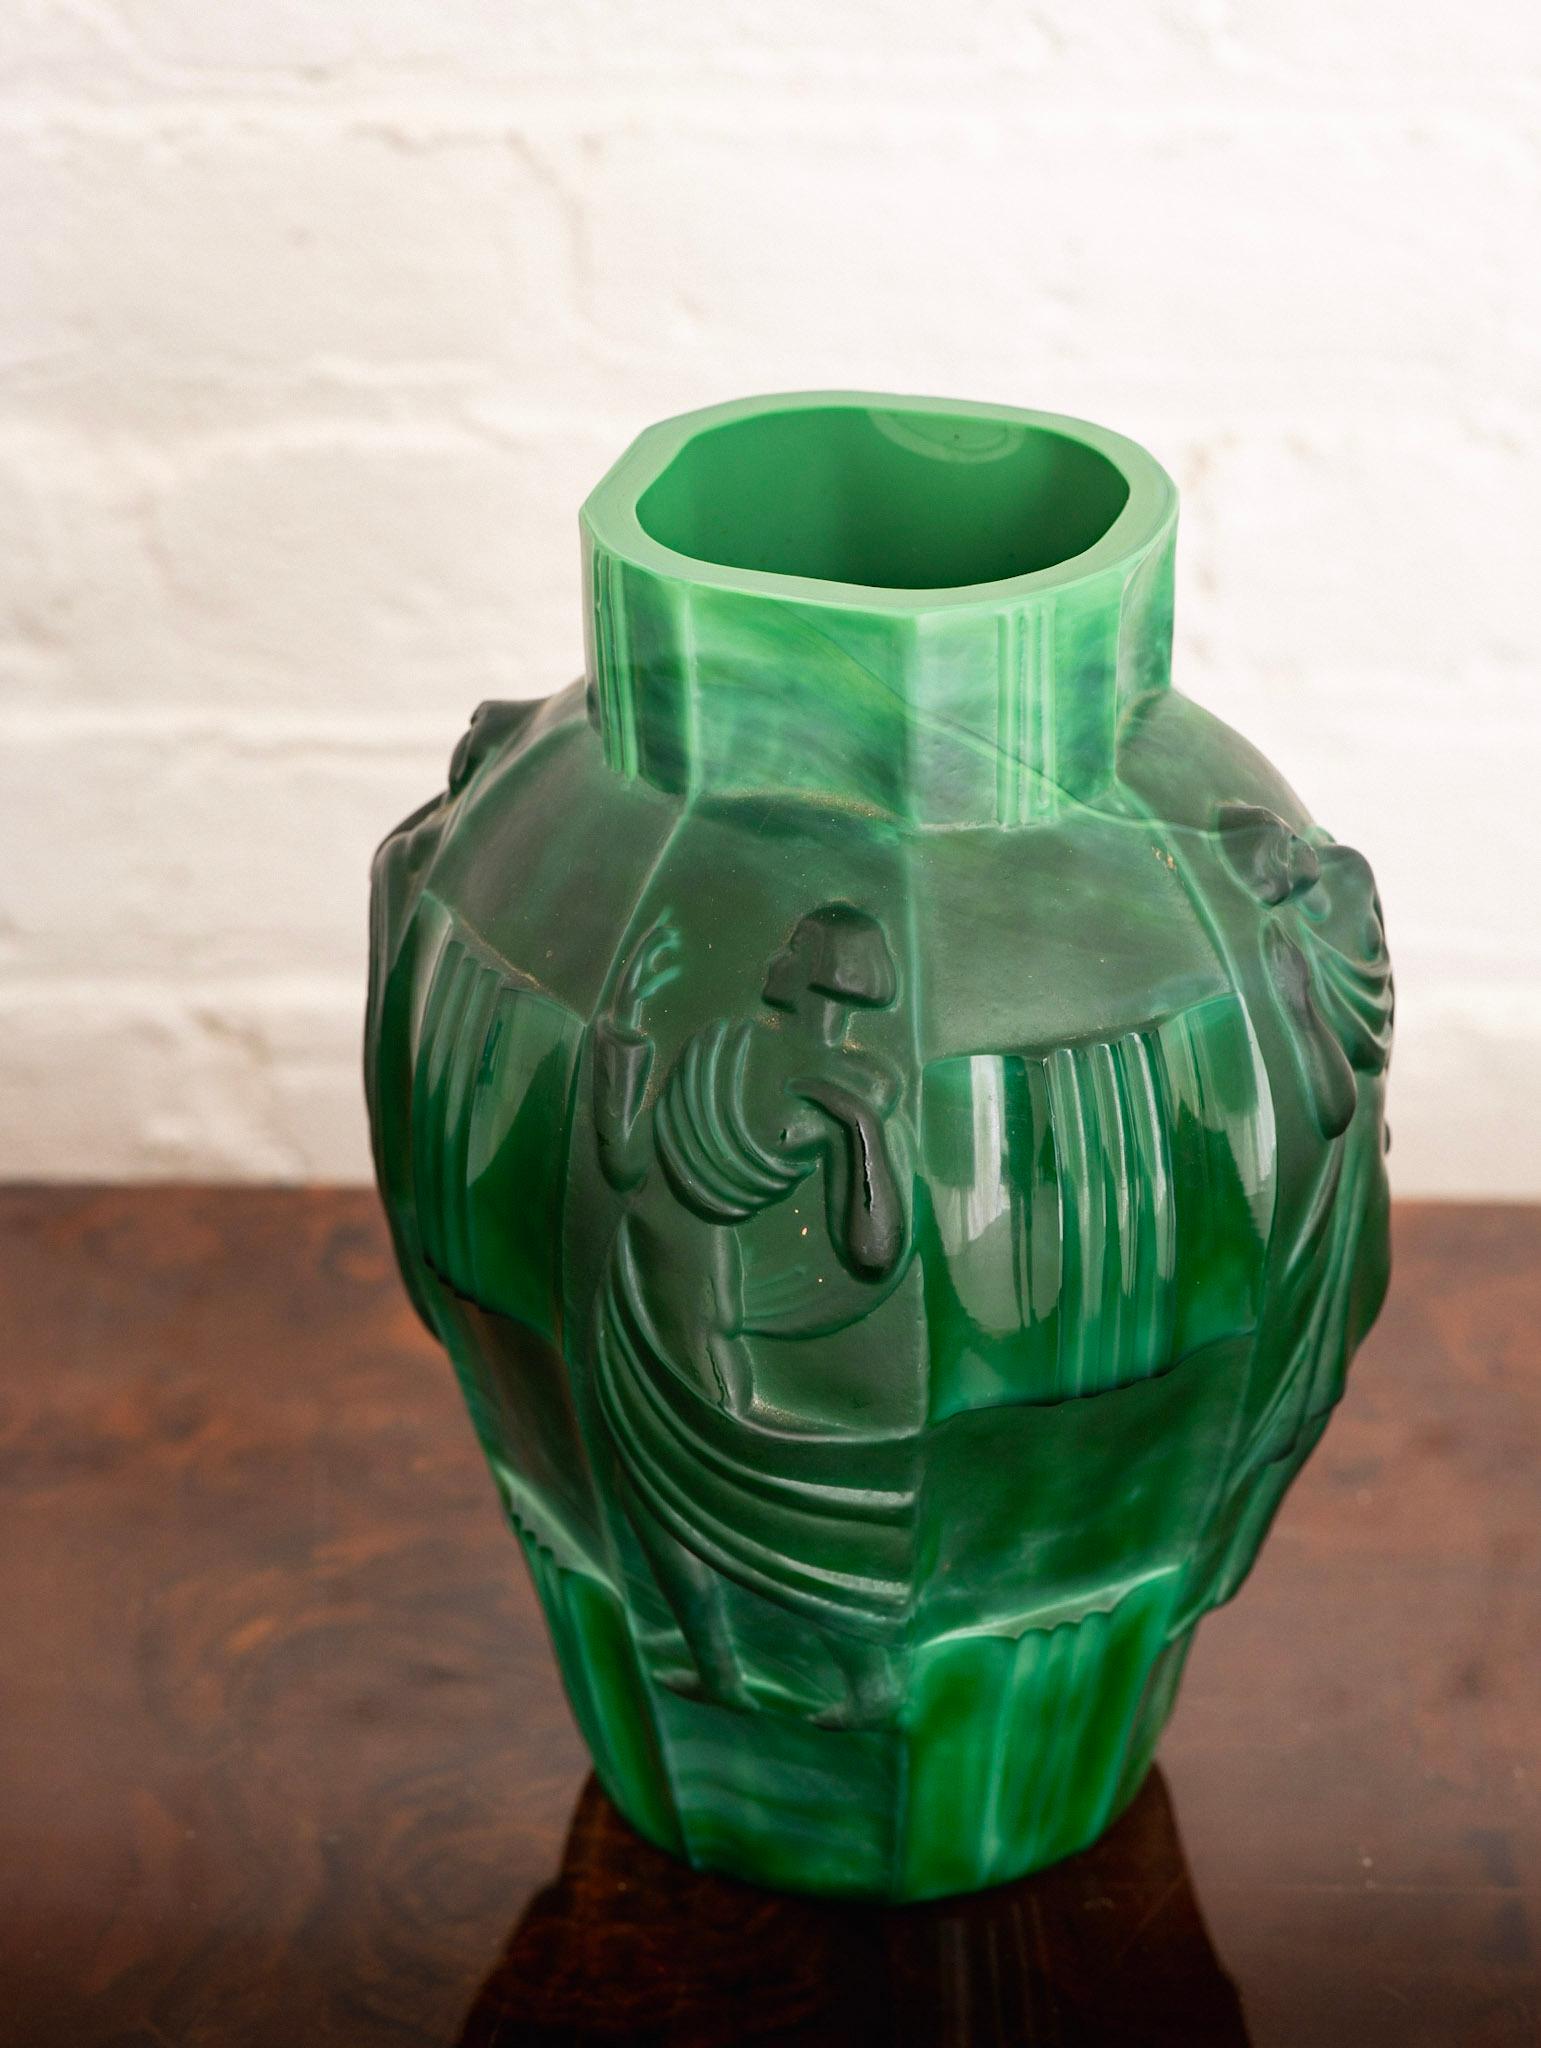 Art Deco jade glass vase by Curt Schlevogt(1869-1959) for Ingrid. 
Schlevogt was an American-born, Czech glass designer and entrepreneur. Schlevogt is best known for his Art Deco malachite glass vessels with relief-pressed nude figures and flowers,